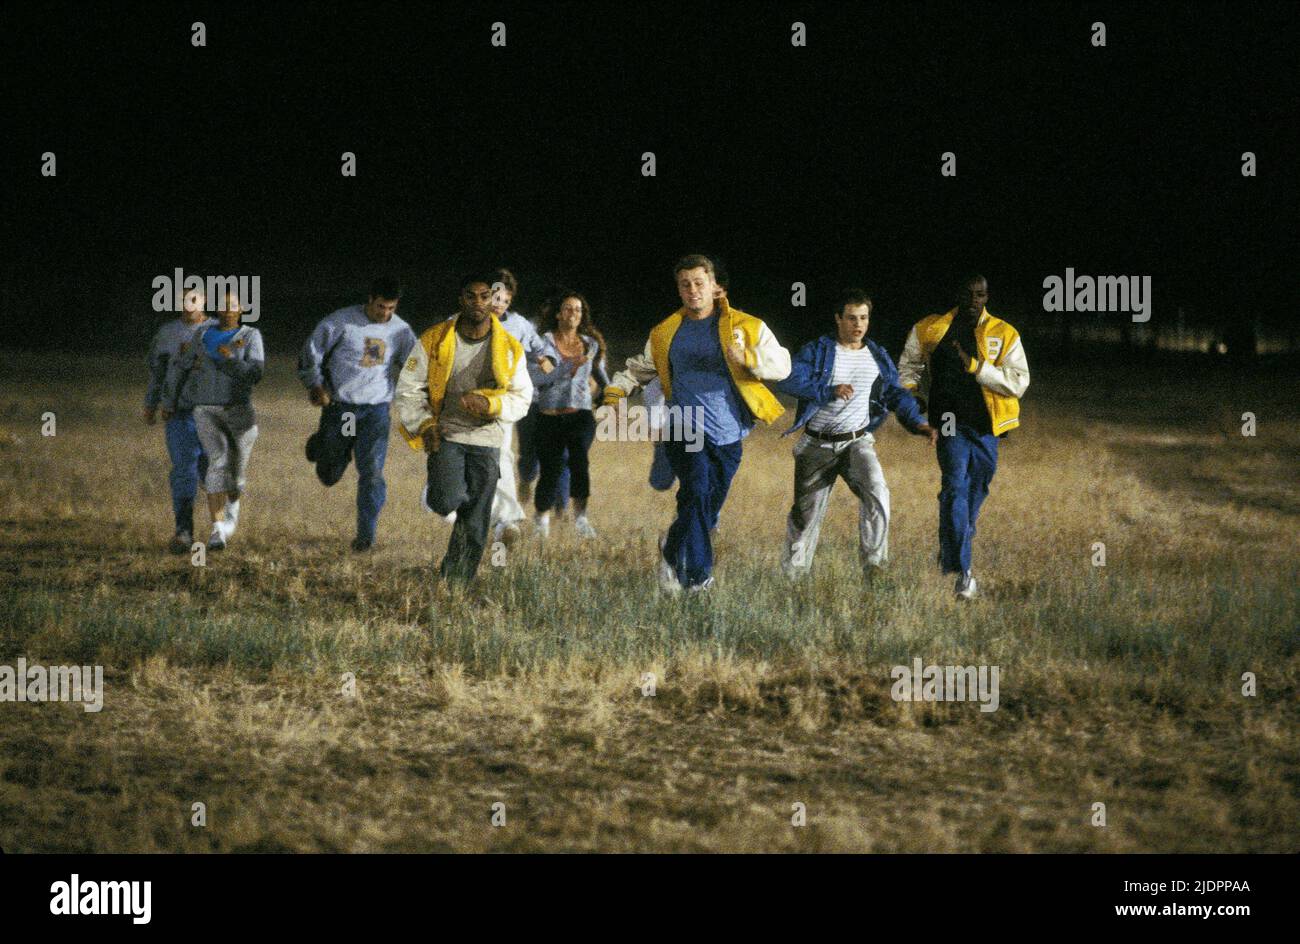 STUDENTS RUN THROUGH FIELD, JEEPERS CREEPERS II, 2003, Stock Photo